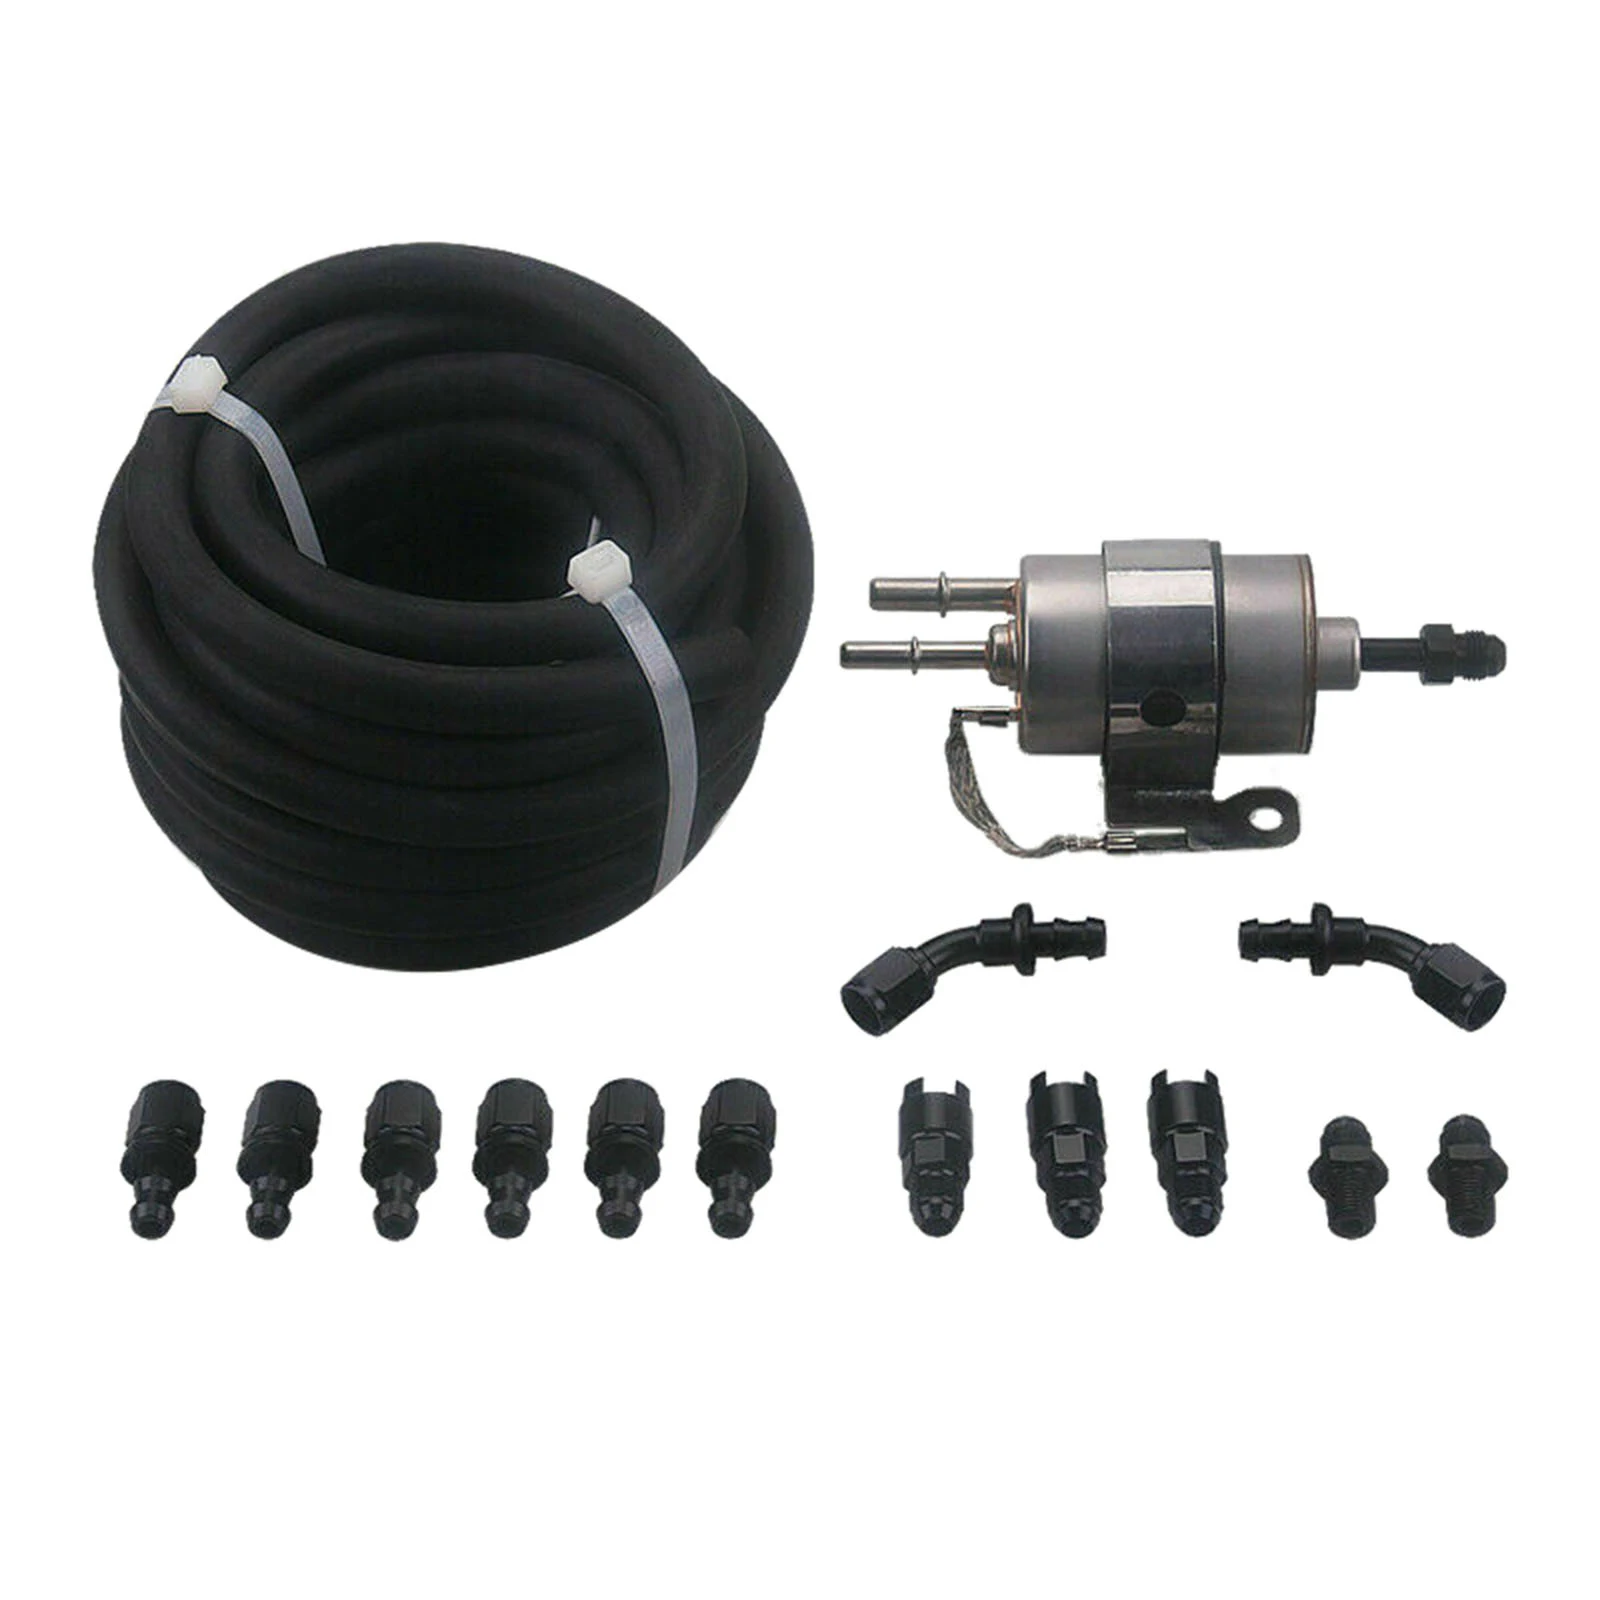 7.5m Fuel Injection Line Adapter Pressure Regulator Fuel Filter Set Direct Replaces for LS